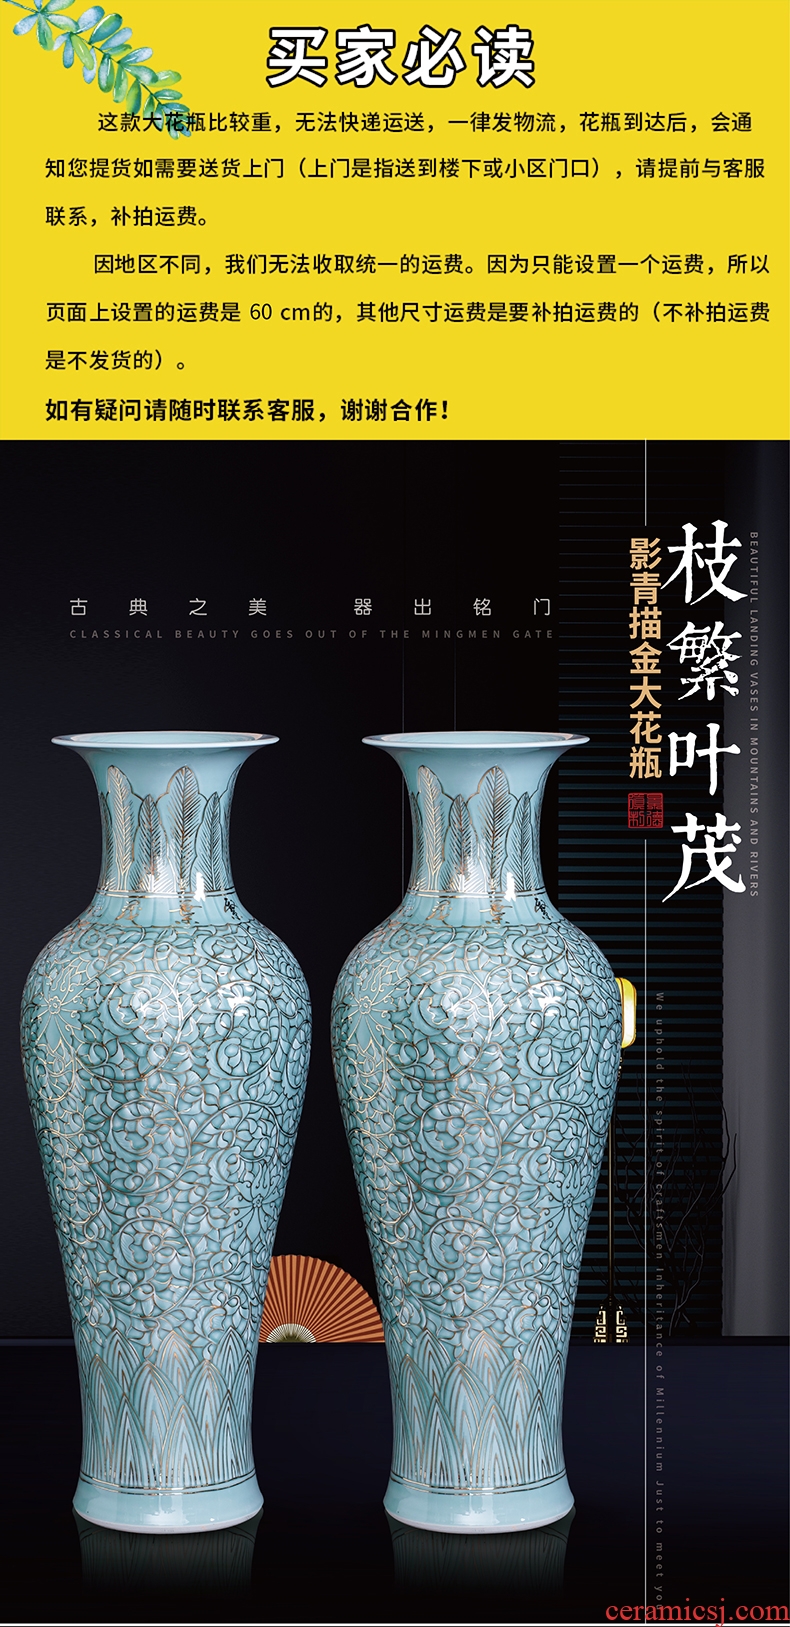 Contracted and modern new Chinese pottery vase home furnishing articles hotel club house sitting room porch flower arrangement - 599676994614